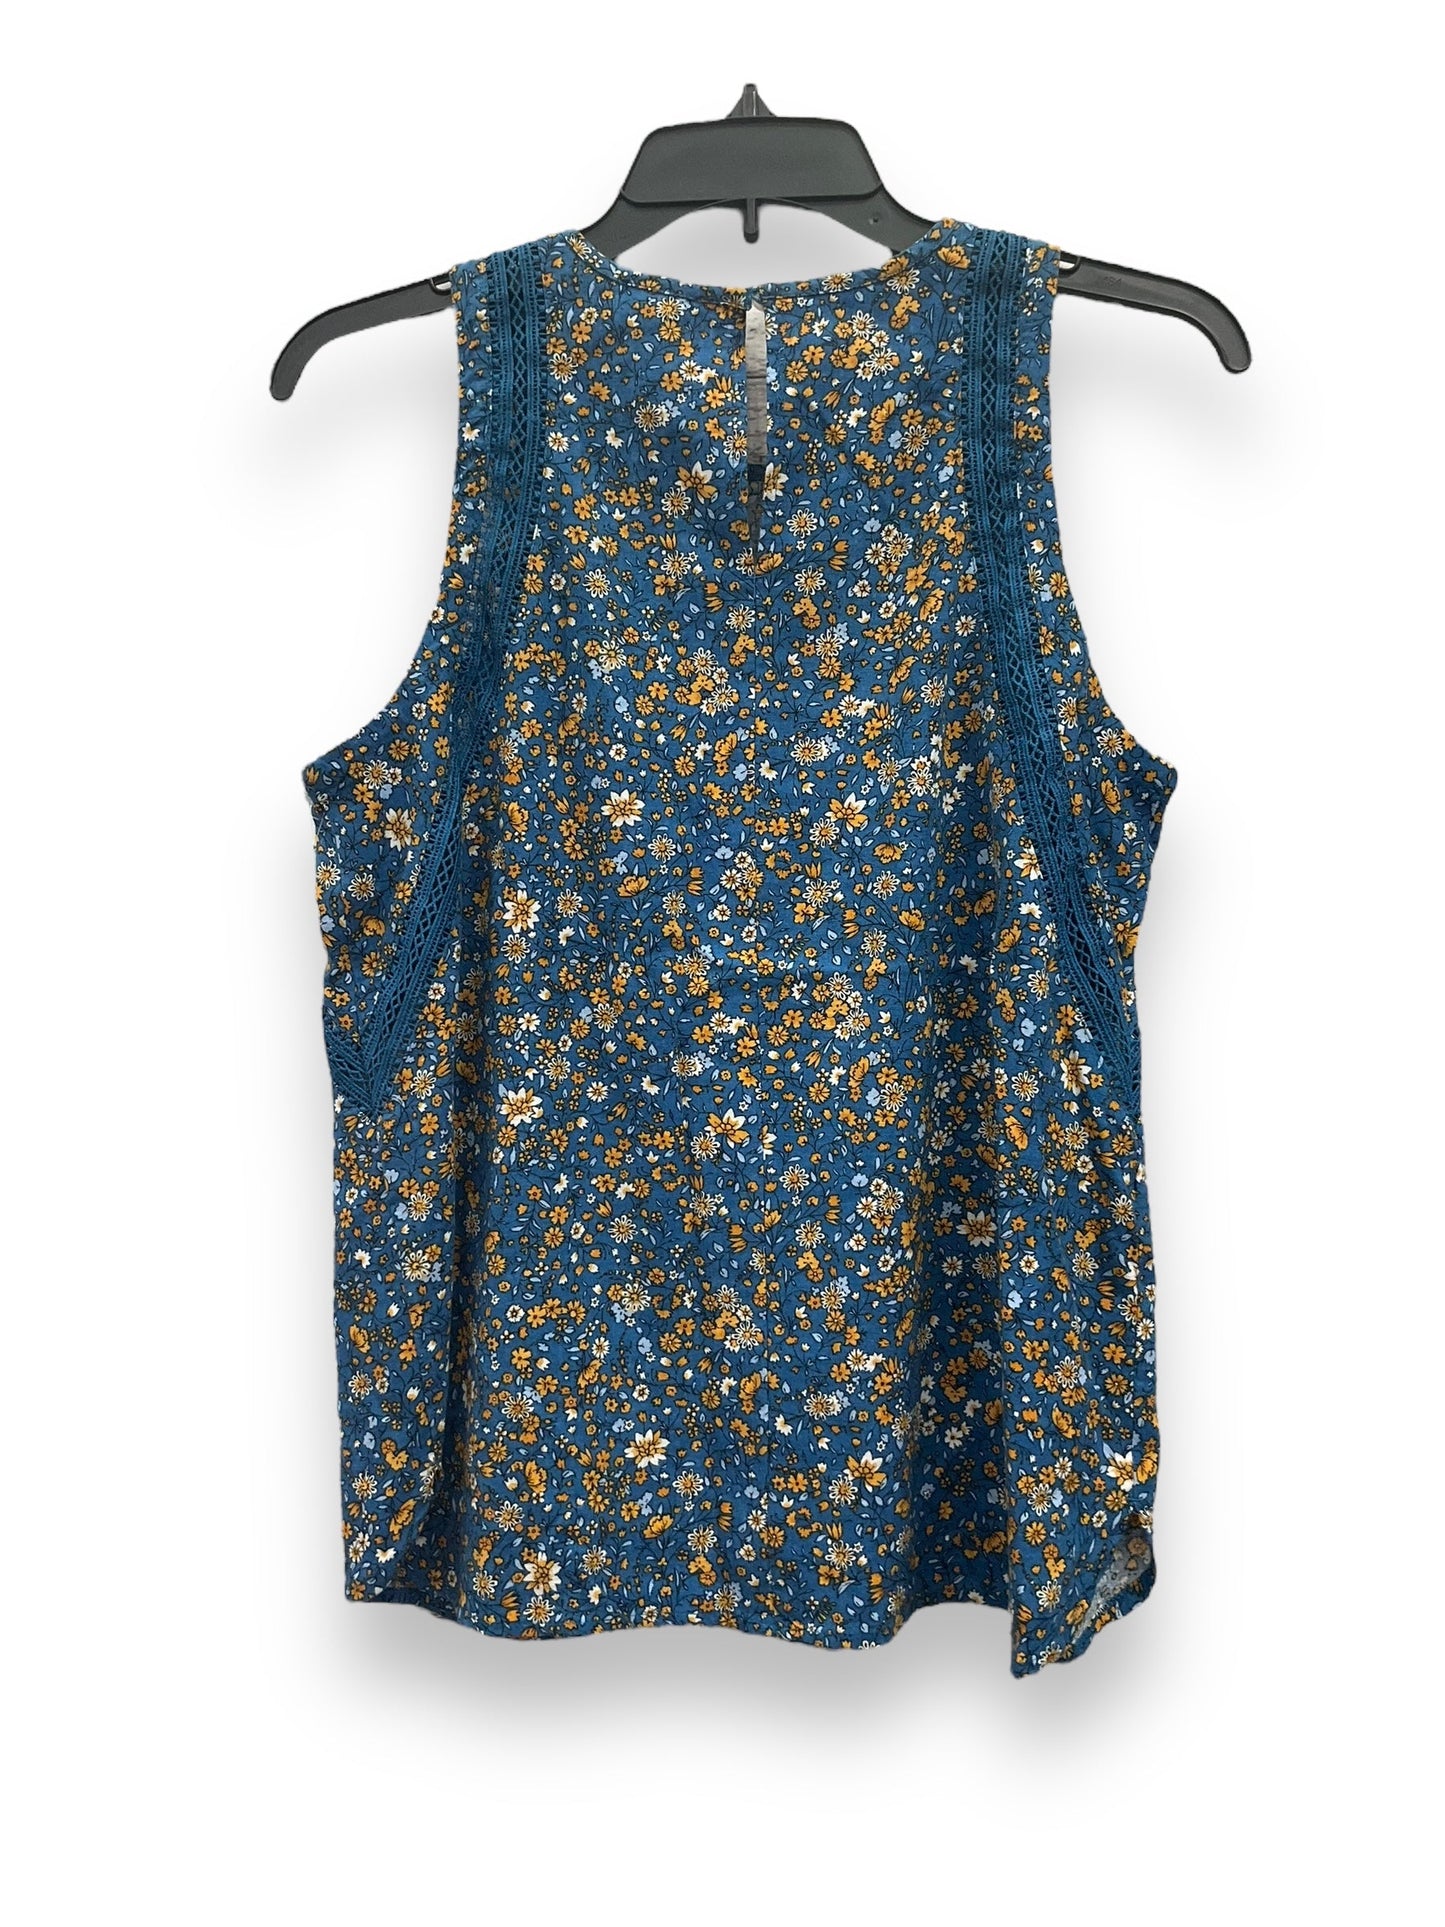 Floral Print Top Sleeveless Ann Taylor, Size S